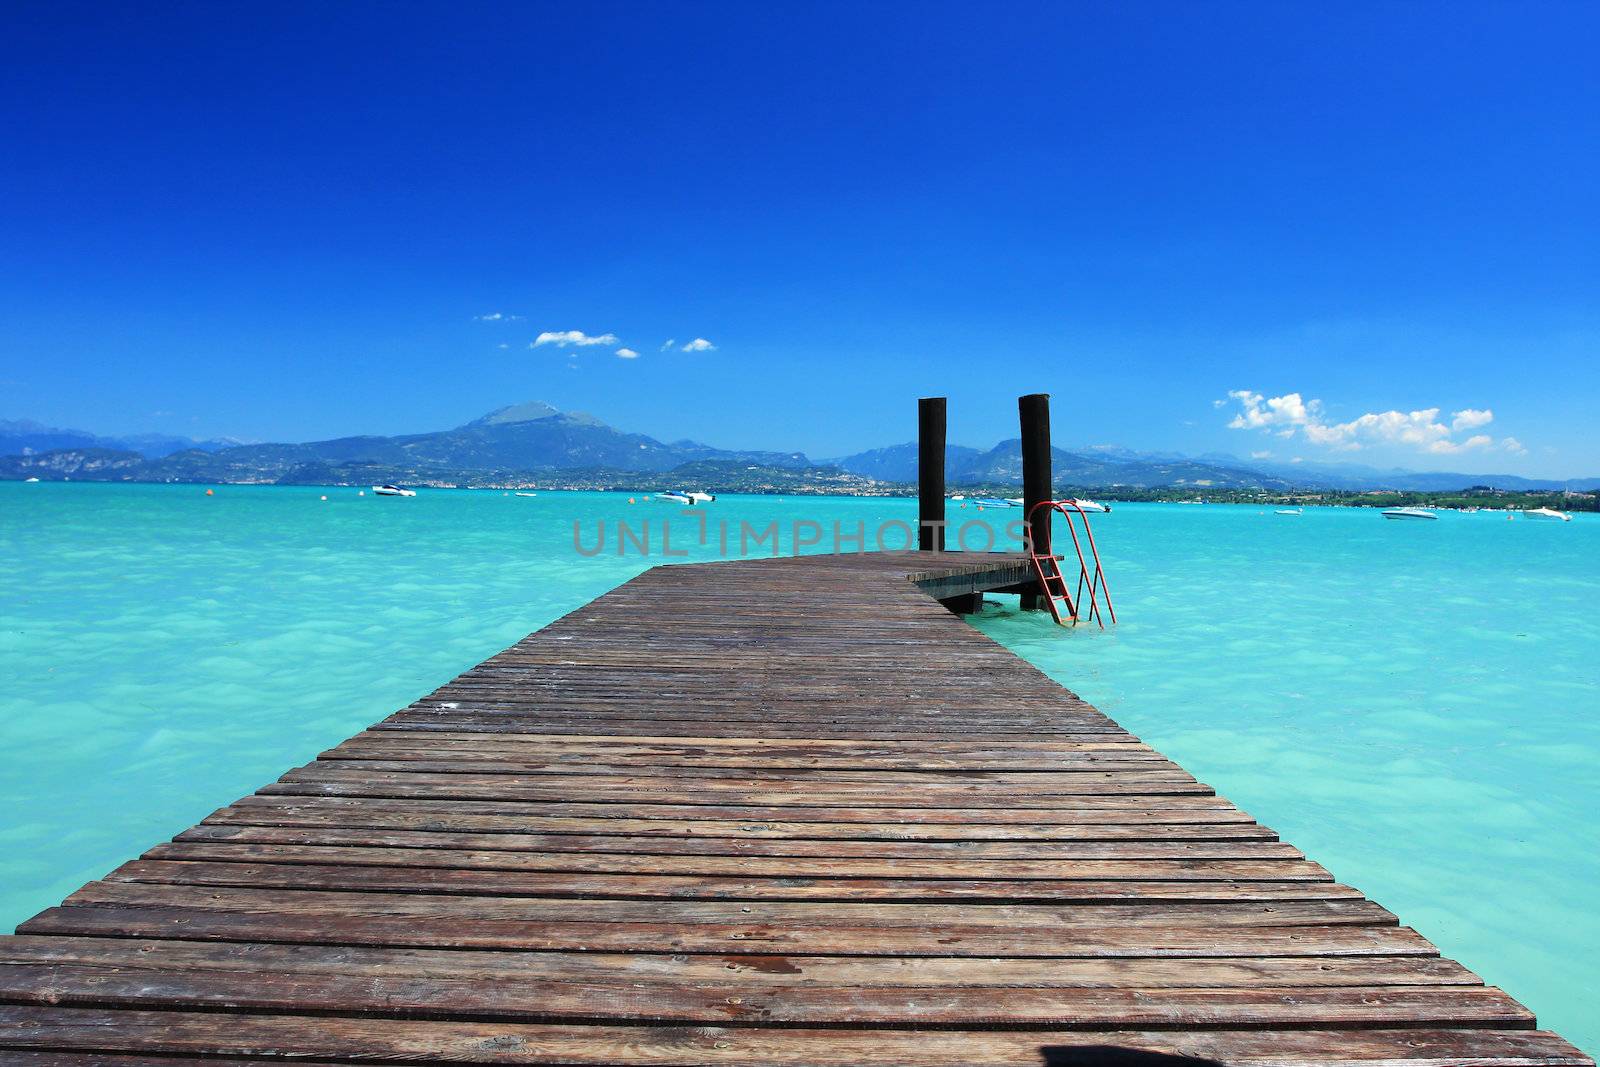 Small jetty in lake Garda Italy, fantastic blue color in sky and green invitin color of water. Perfect concept shot for any kind of vacation or tropics